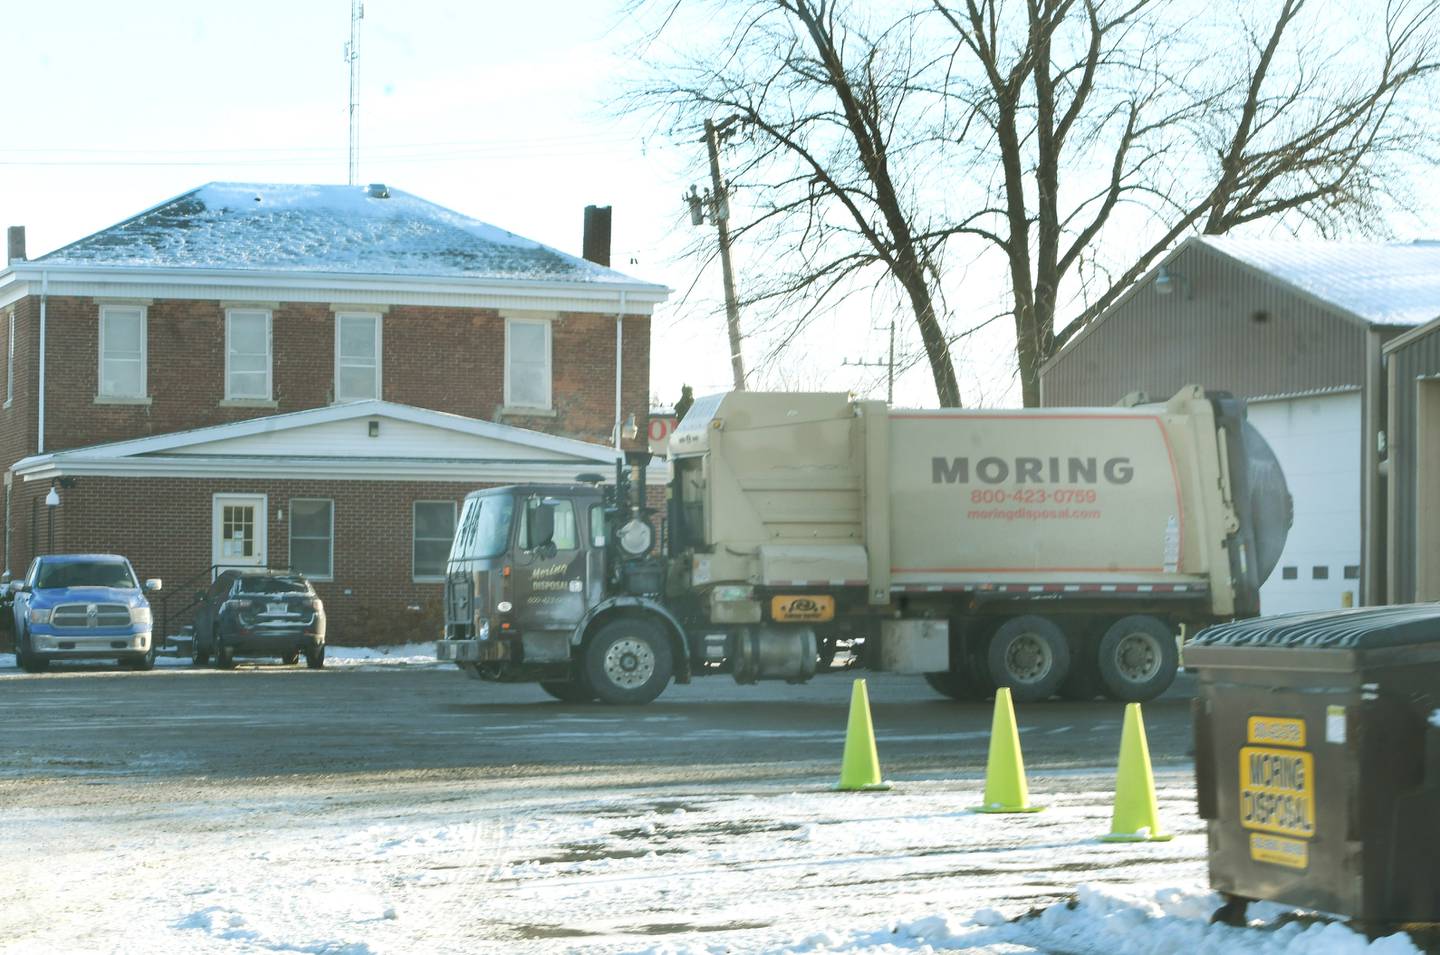 Moring Disposal Inc. was founded in 1977 in Forreston by Larry Moring. The business and its properties in downtown Forreston were sold to Republic Services Dec. 15.